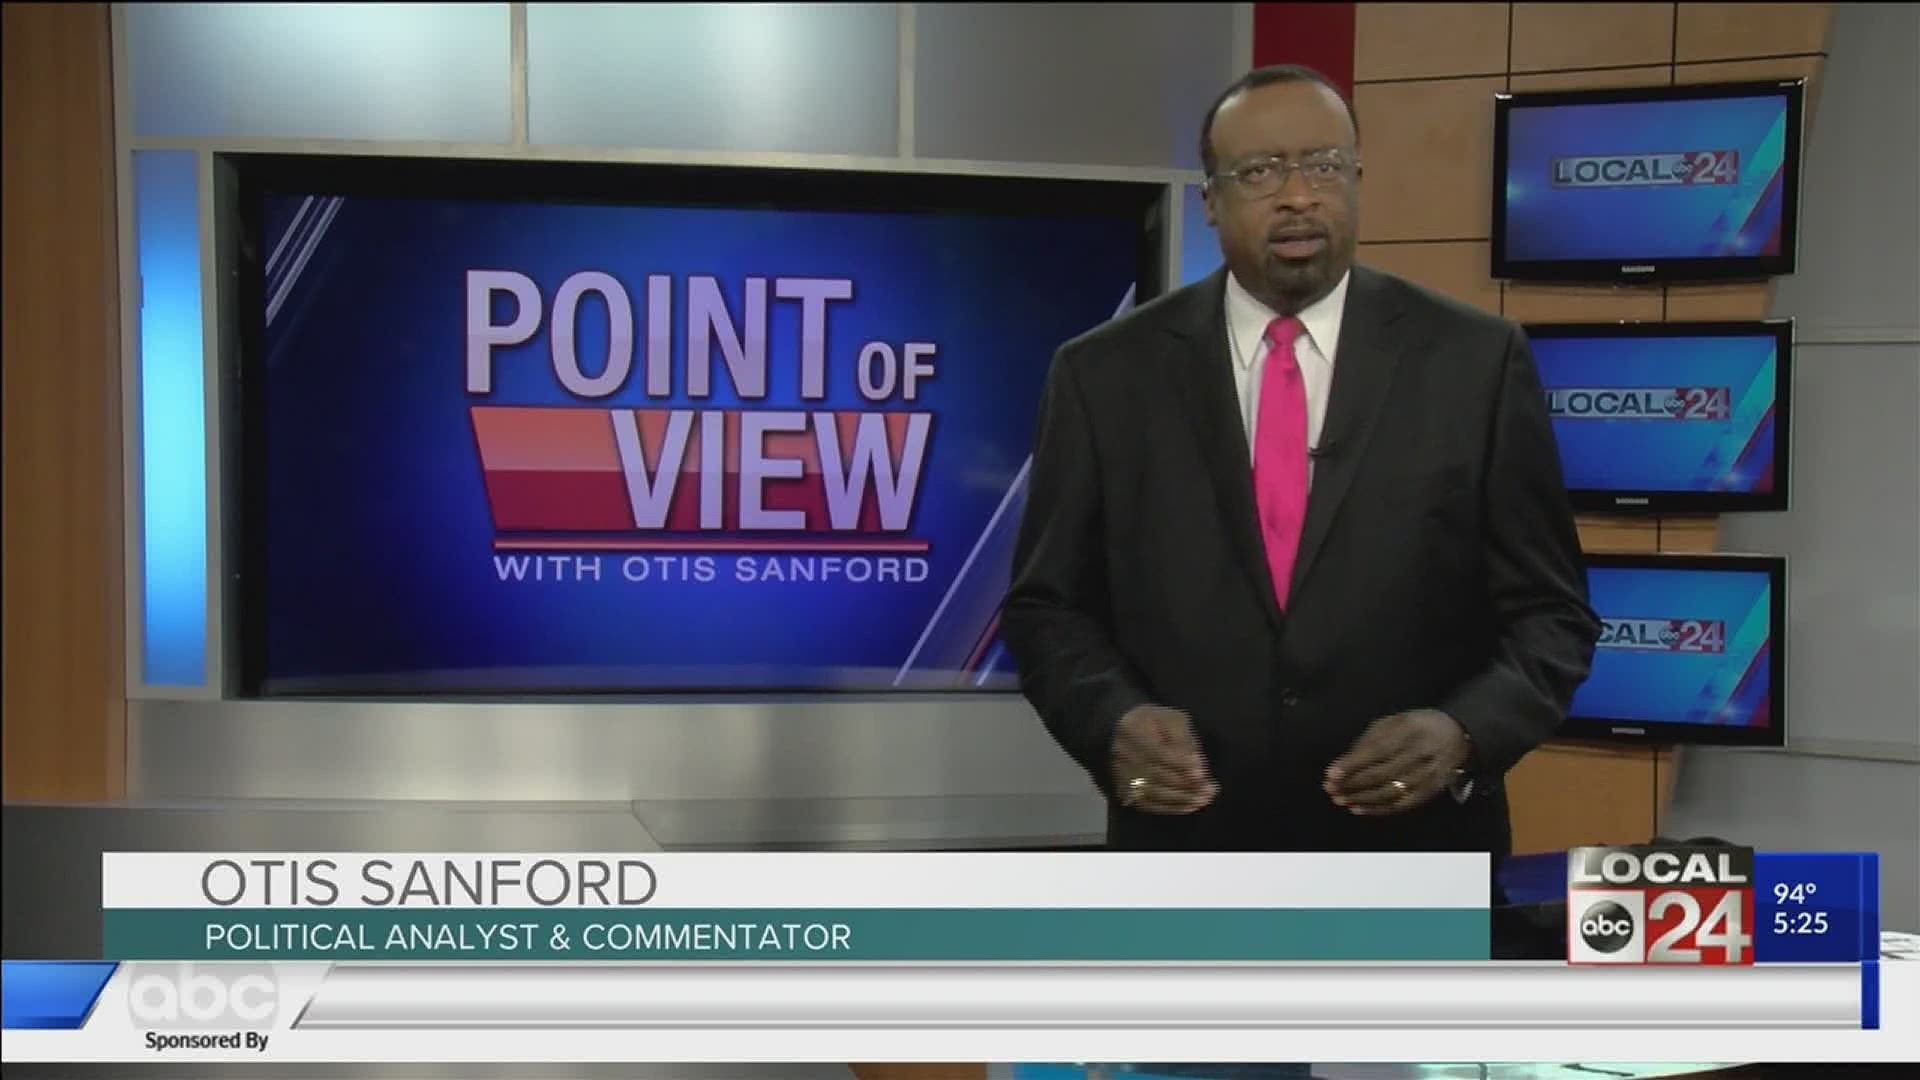 Local 24 News political analyst and commentator Otis Sanford shares his point of view on the spread of COVID-19 in Shelby County.